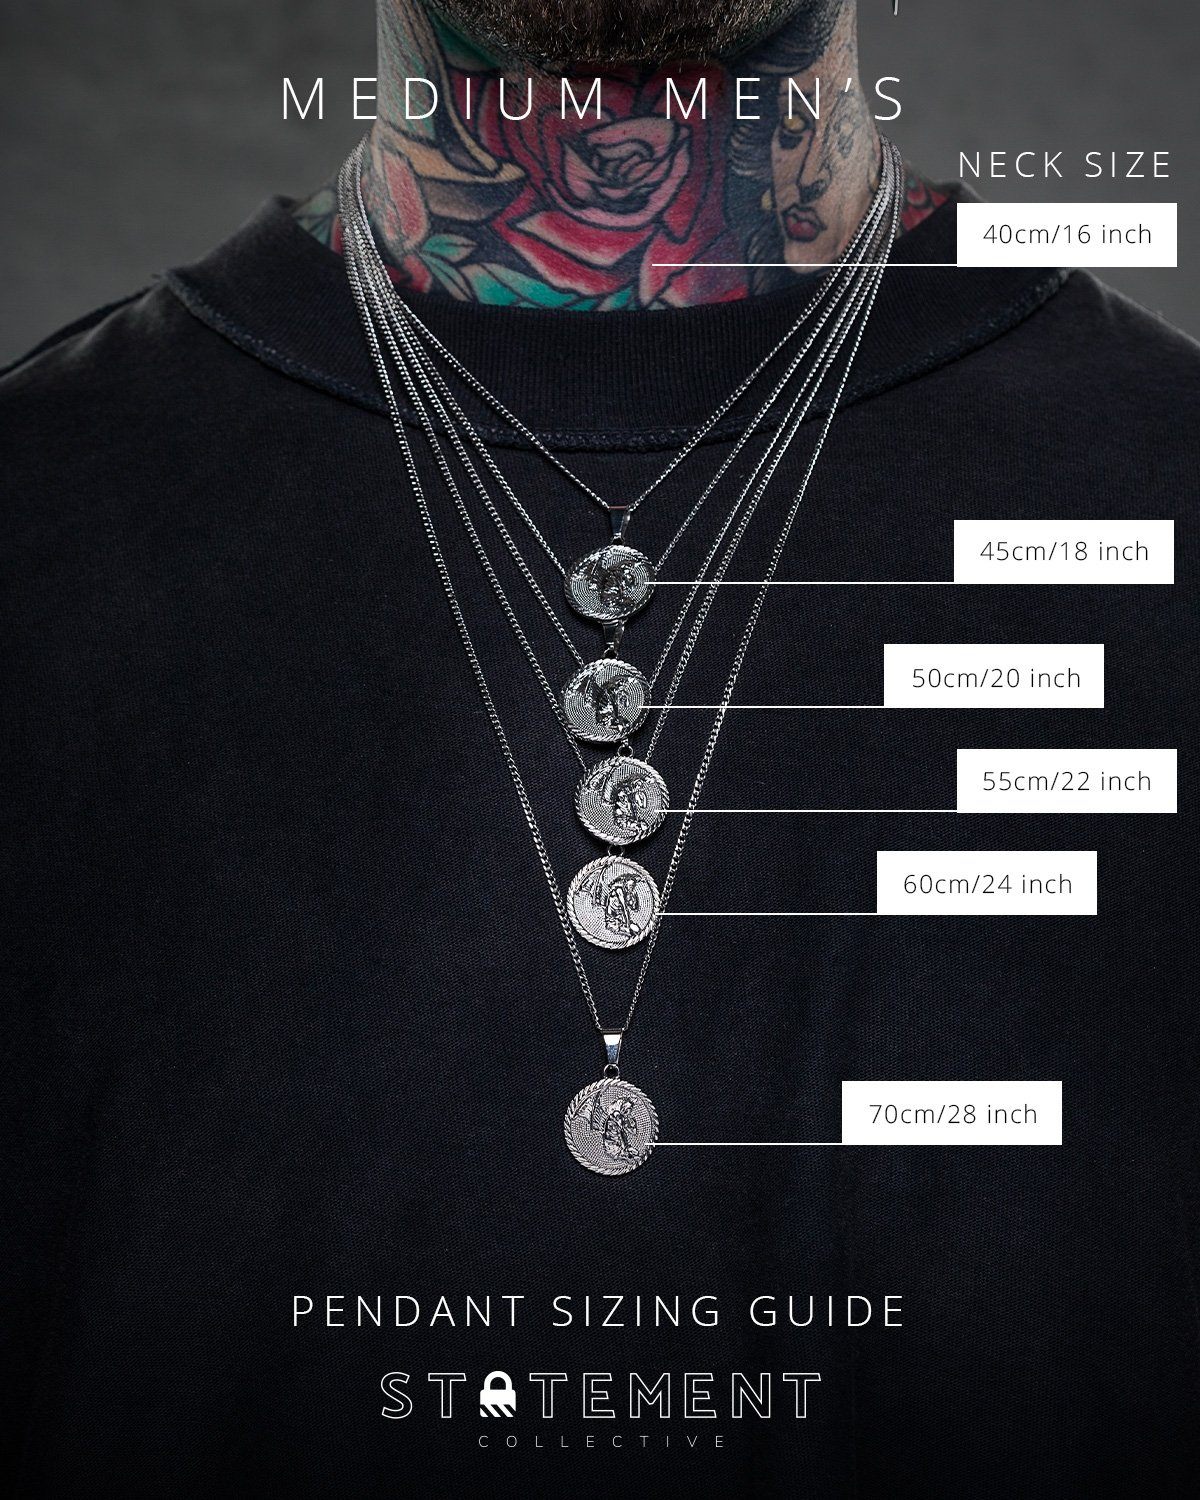 Necklace size examples on man